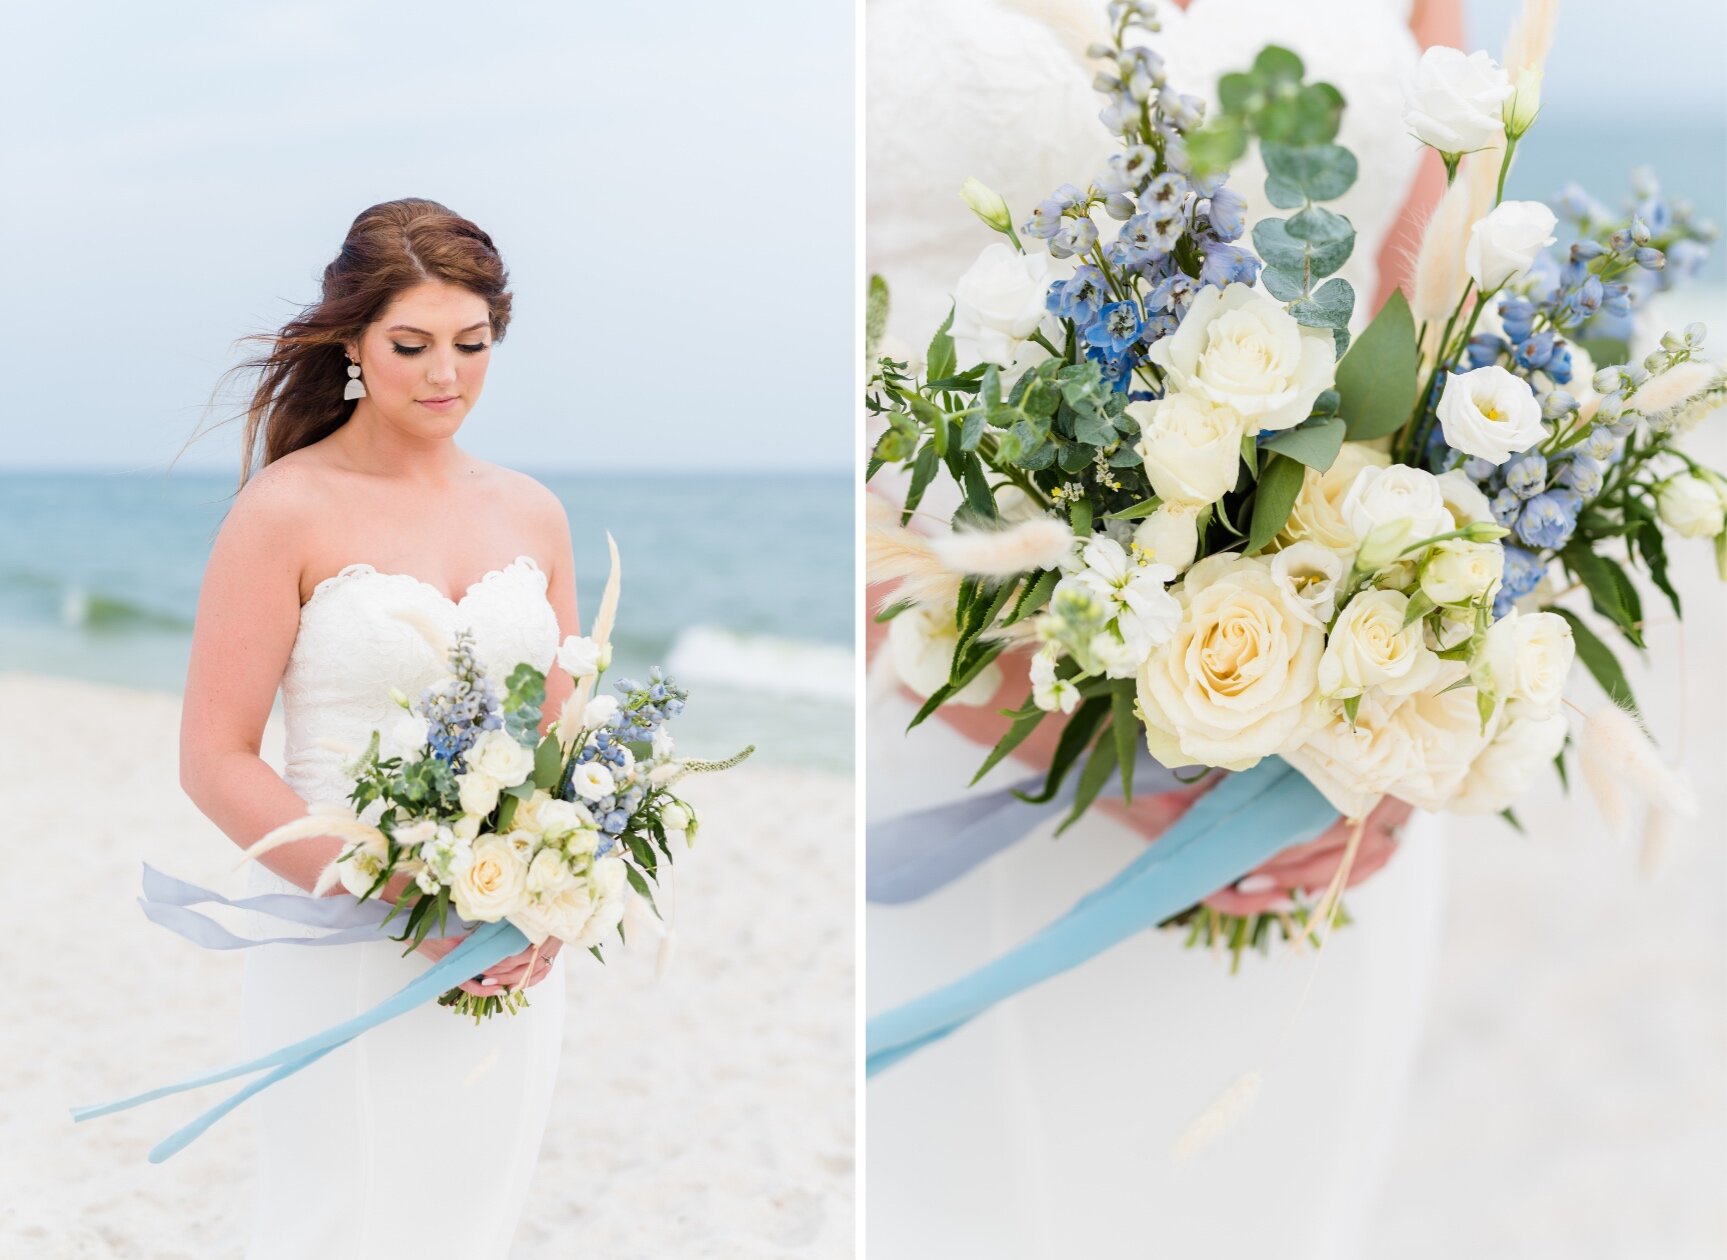 July Orange Beach Wedding Bridal Party Portraits Photographed by Kristen Marcus Photography